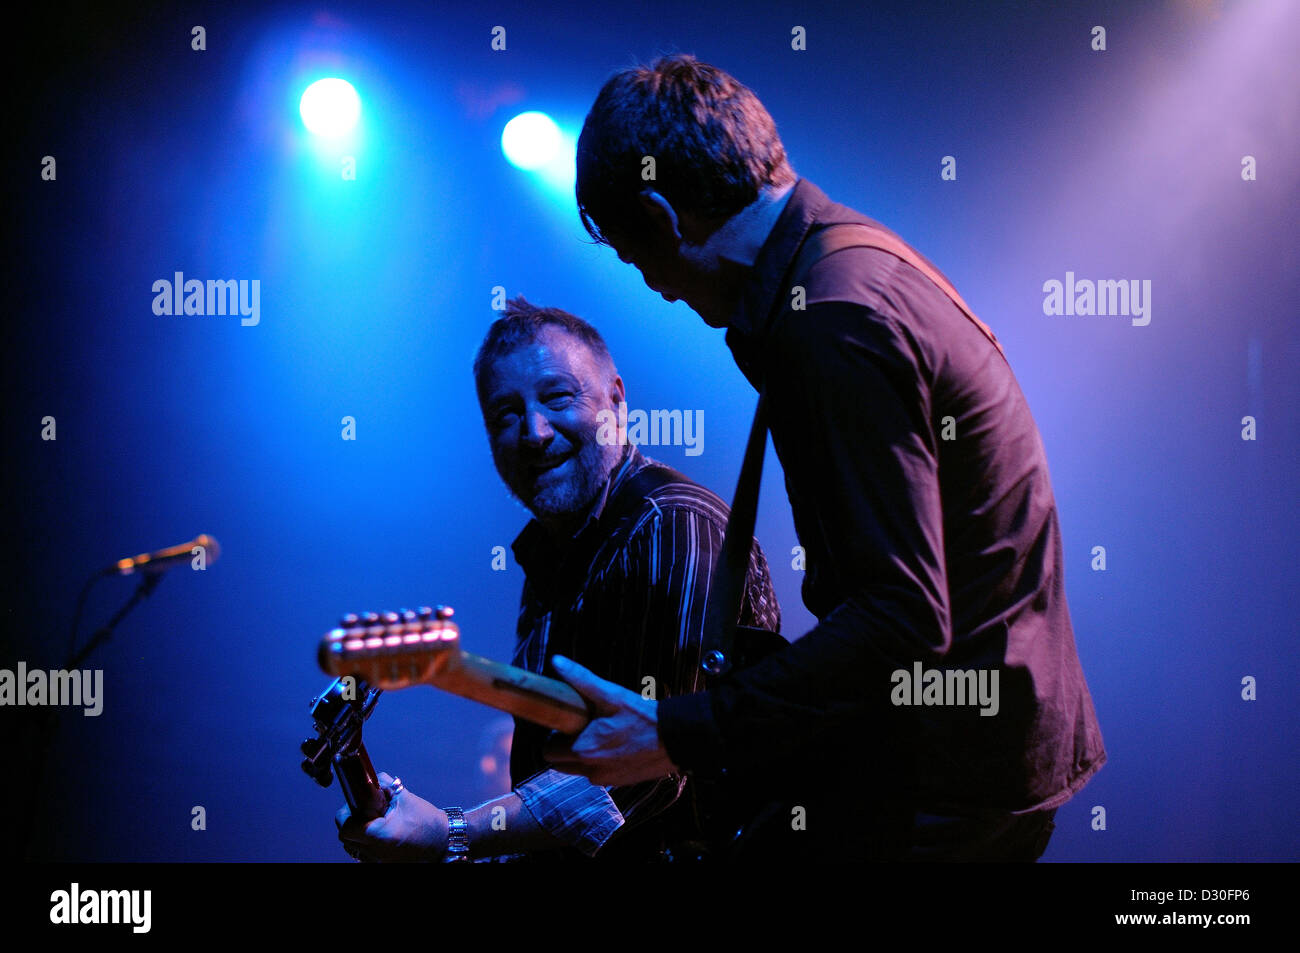 BARCELONA, SPAIN - OCT 10: Peter Hook (Joy Division) performs at Apolo on October 10, 2010 in Barcelona, Spain. Stock Photo